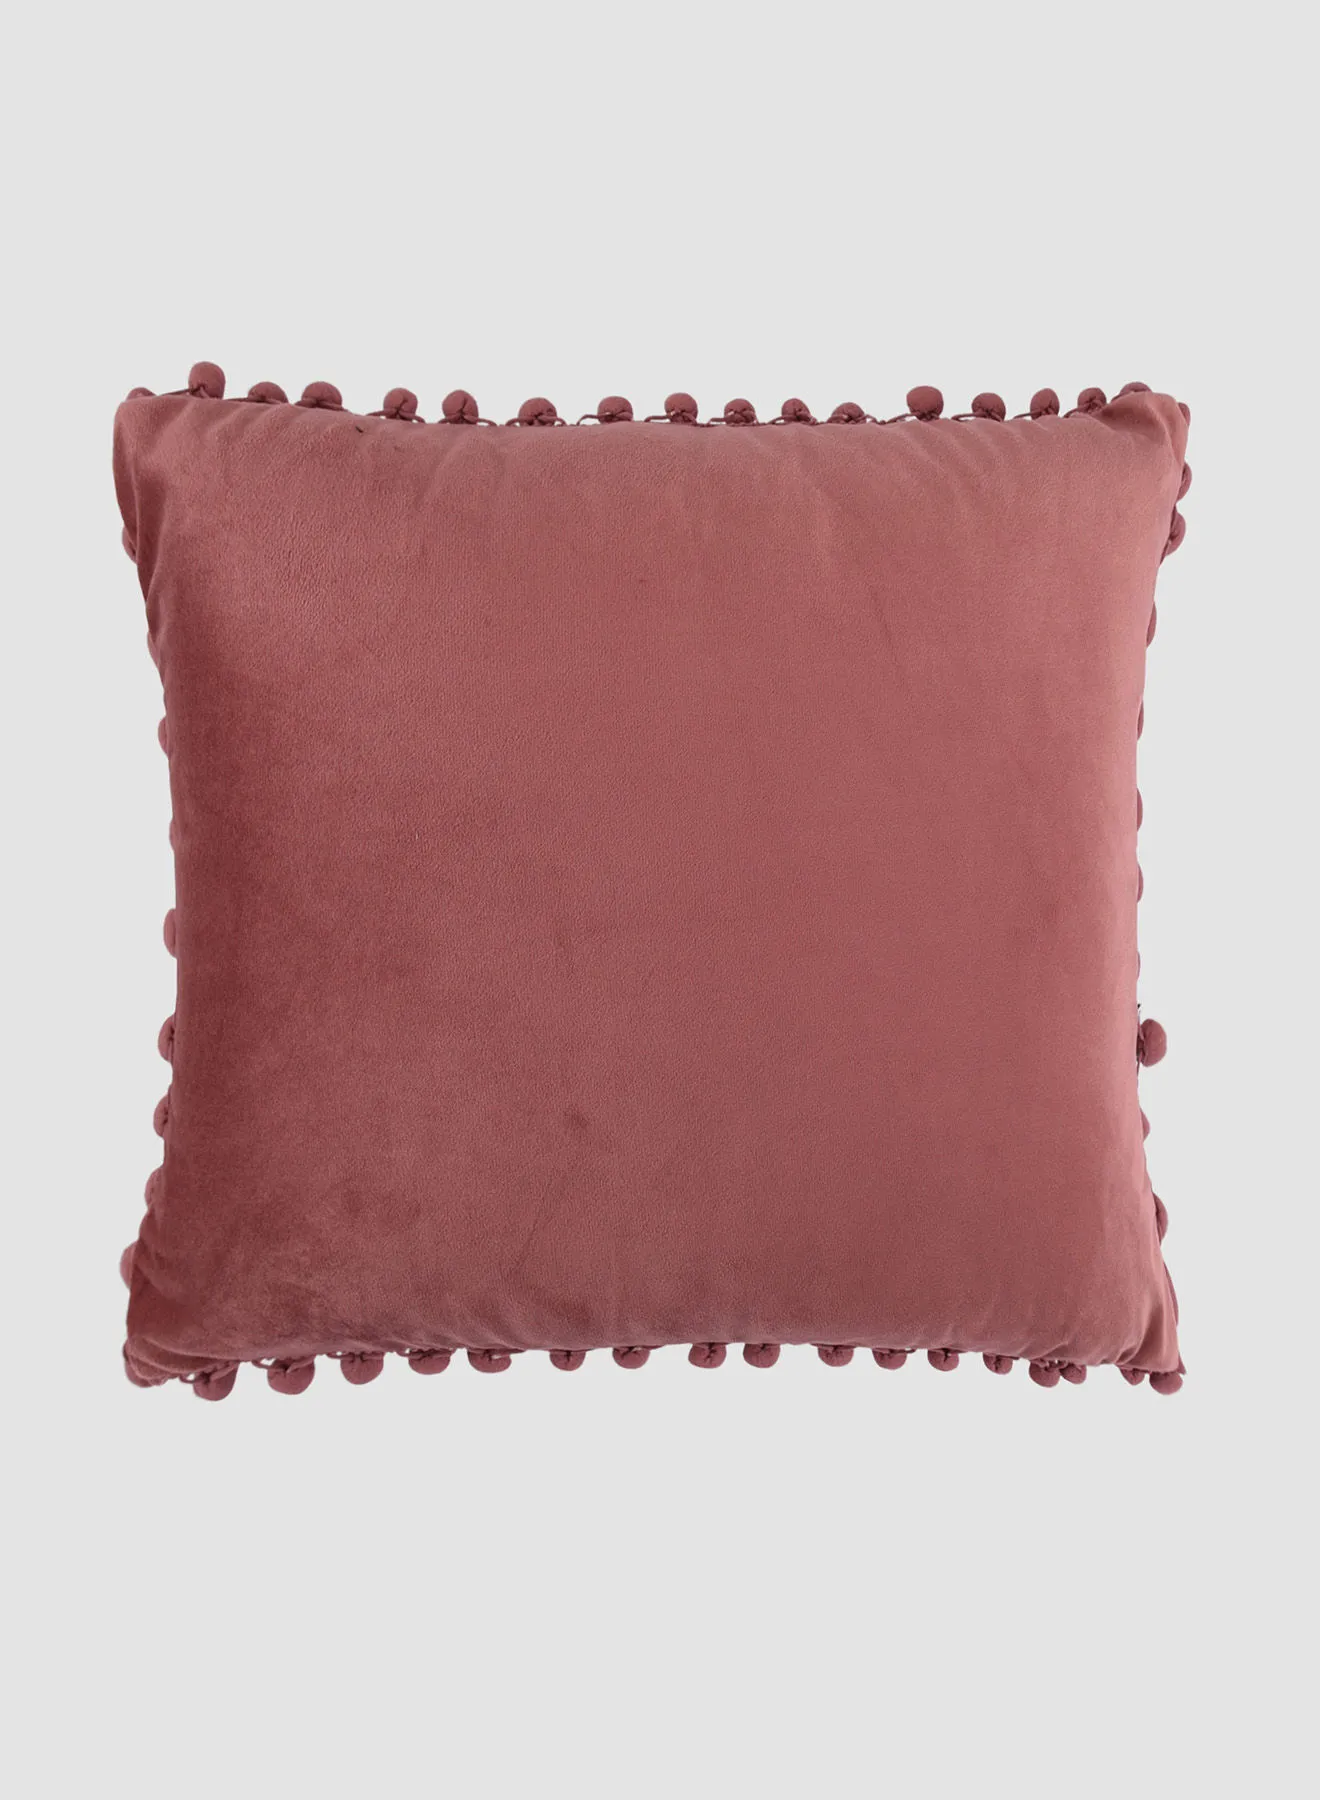 Switch Velvet Cushion  with Pom-poms, Unique Luxury Quality Decor Items for the Perfect Stylish Home Jam 45 x 45cm